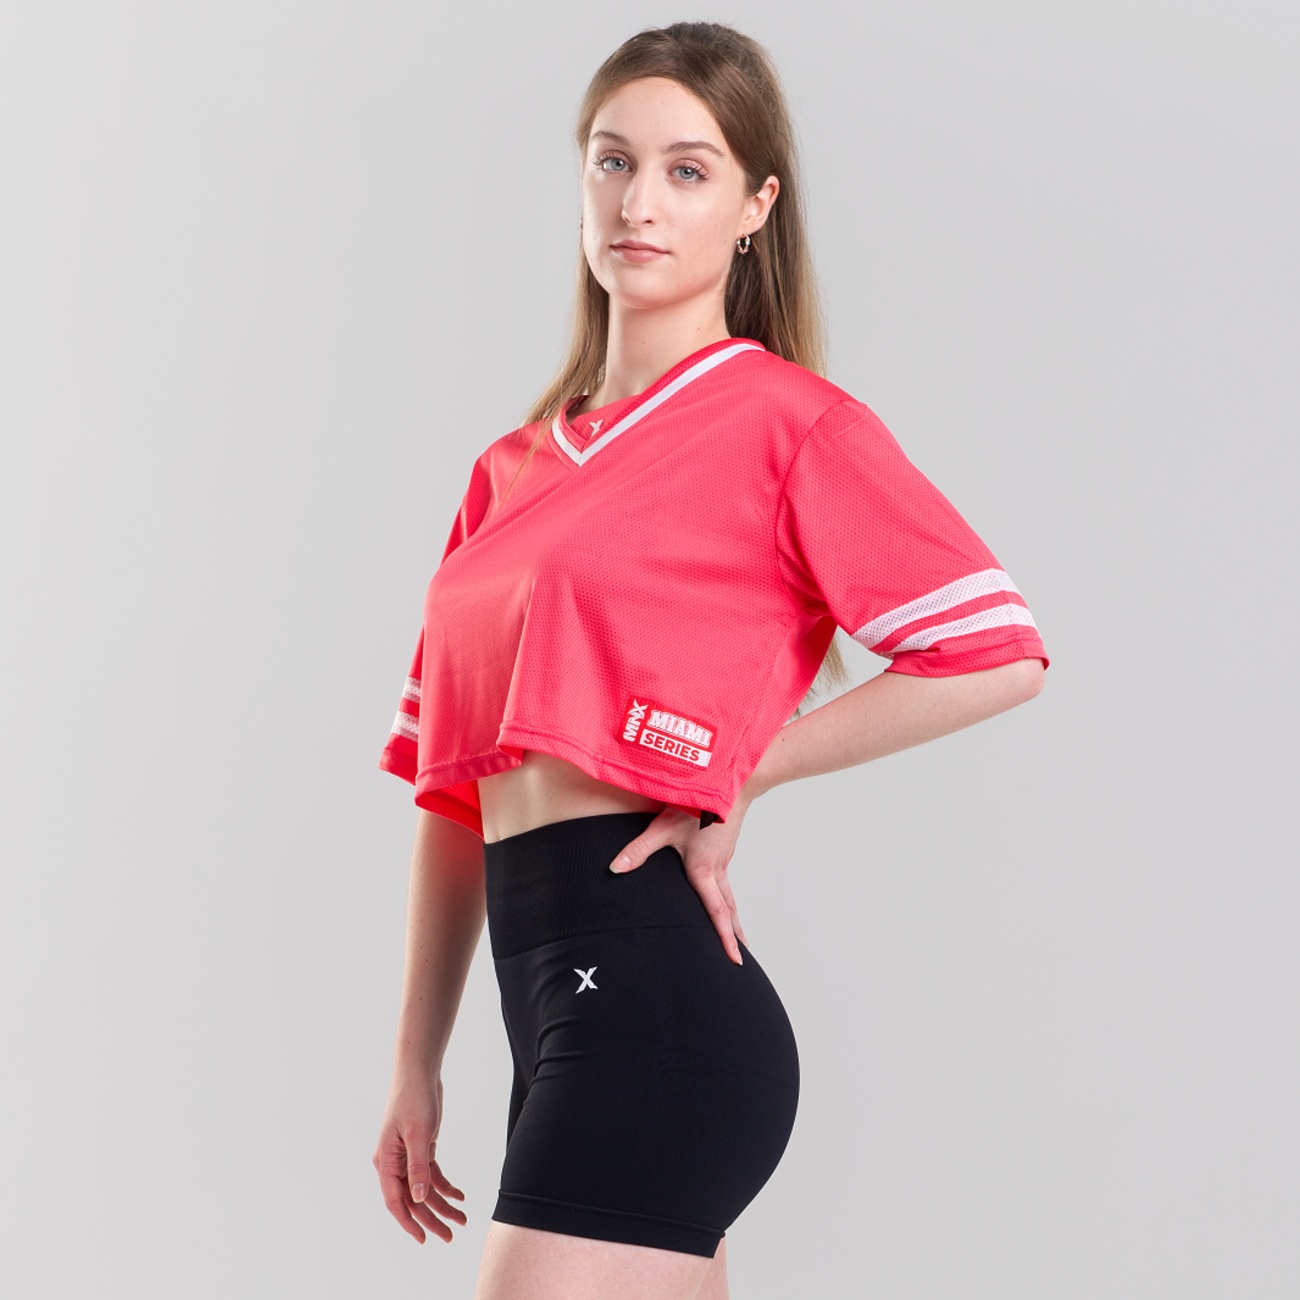 MNX-CROPPED-JERSEY-pink-1